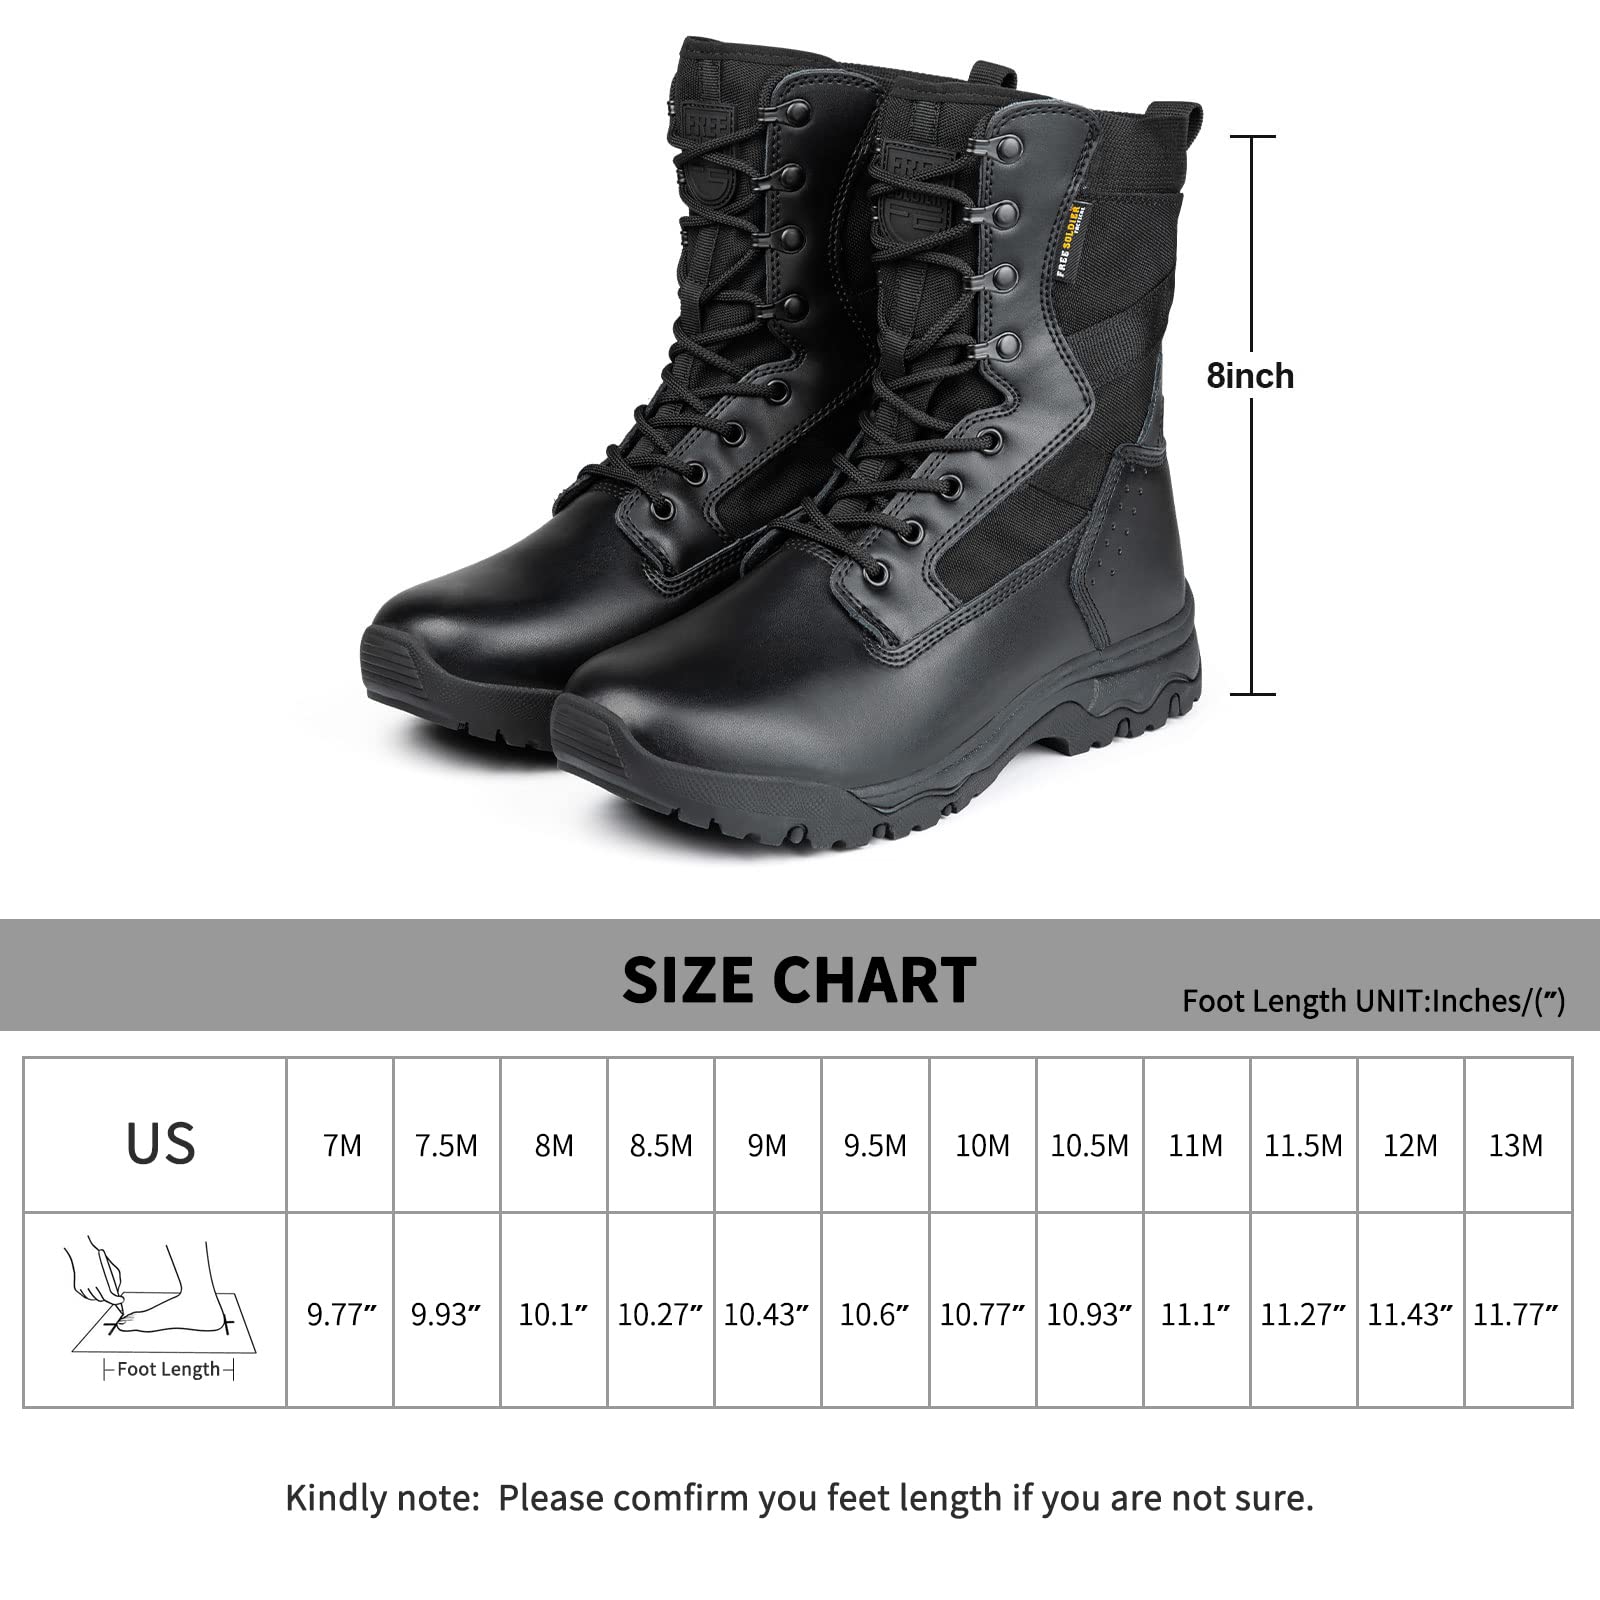 8-Inch Lightweight Thin Military Work Boots-Leather - FreeSoldier